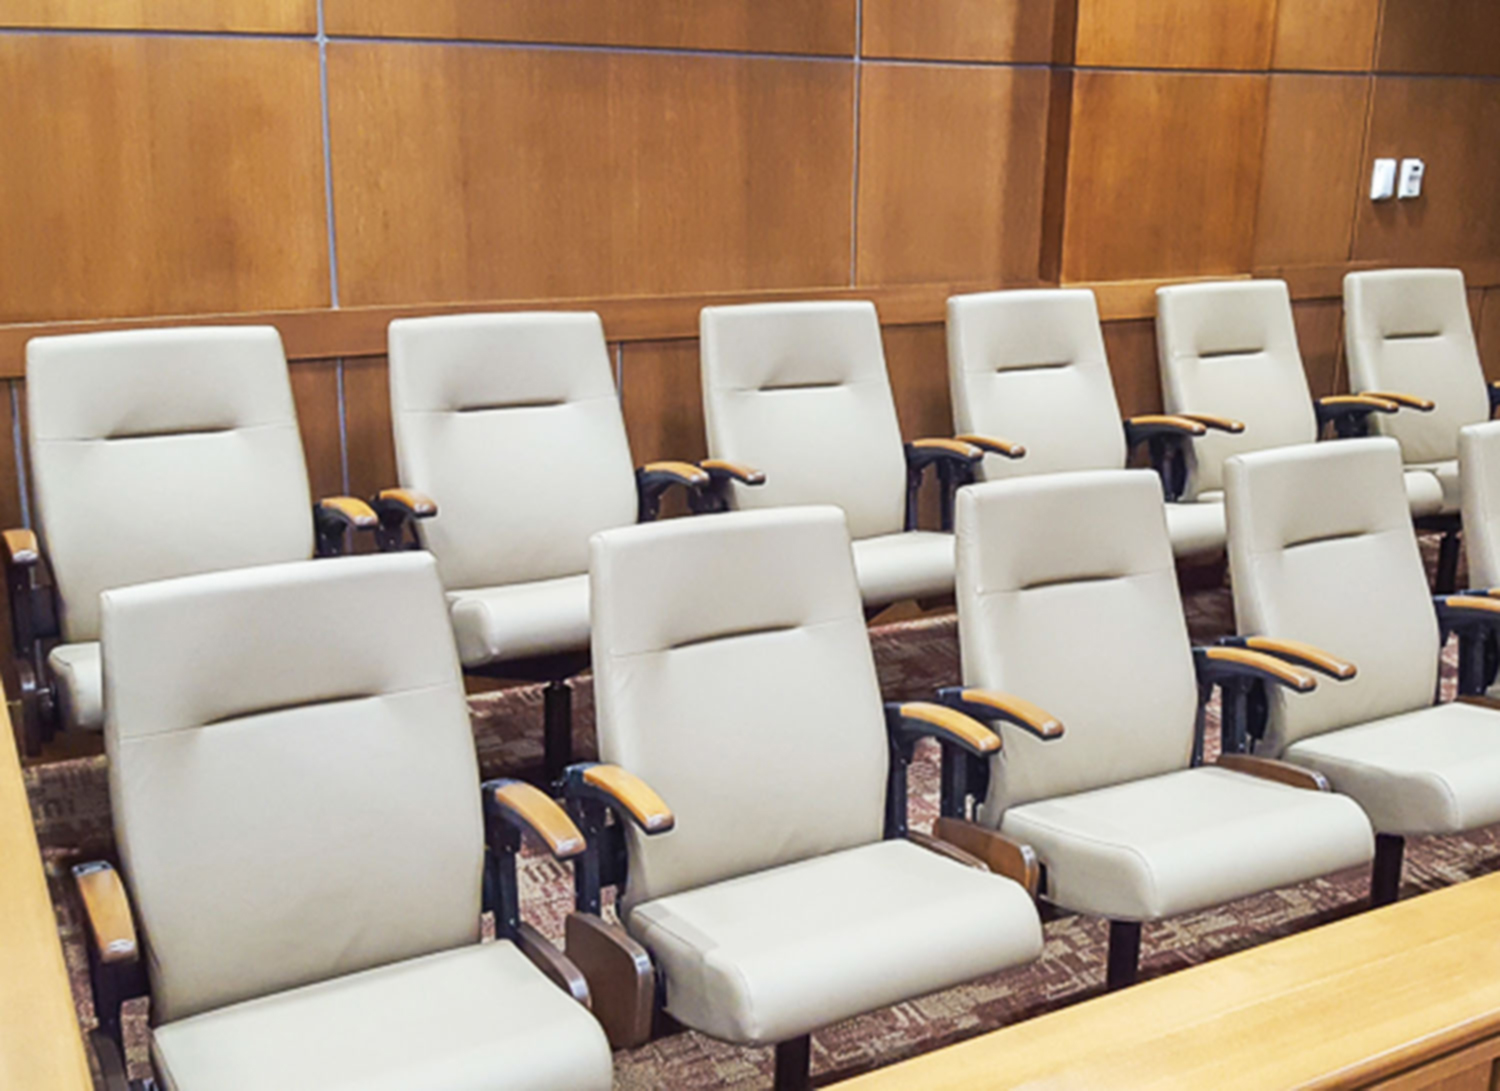 Jury Seats with Clarity Backs in Ute Tribe Justice Center - Fort Duchesne, UT